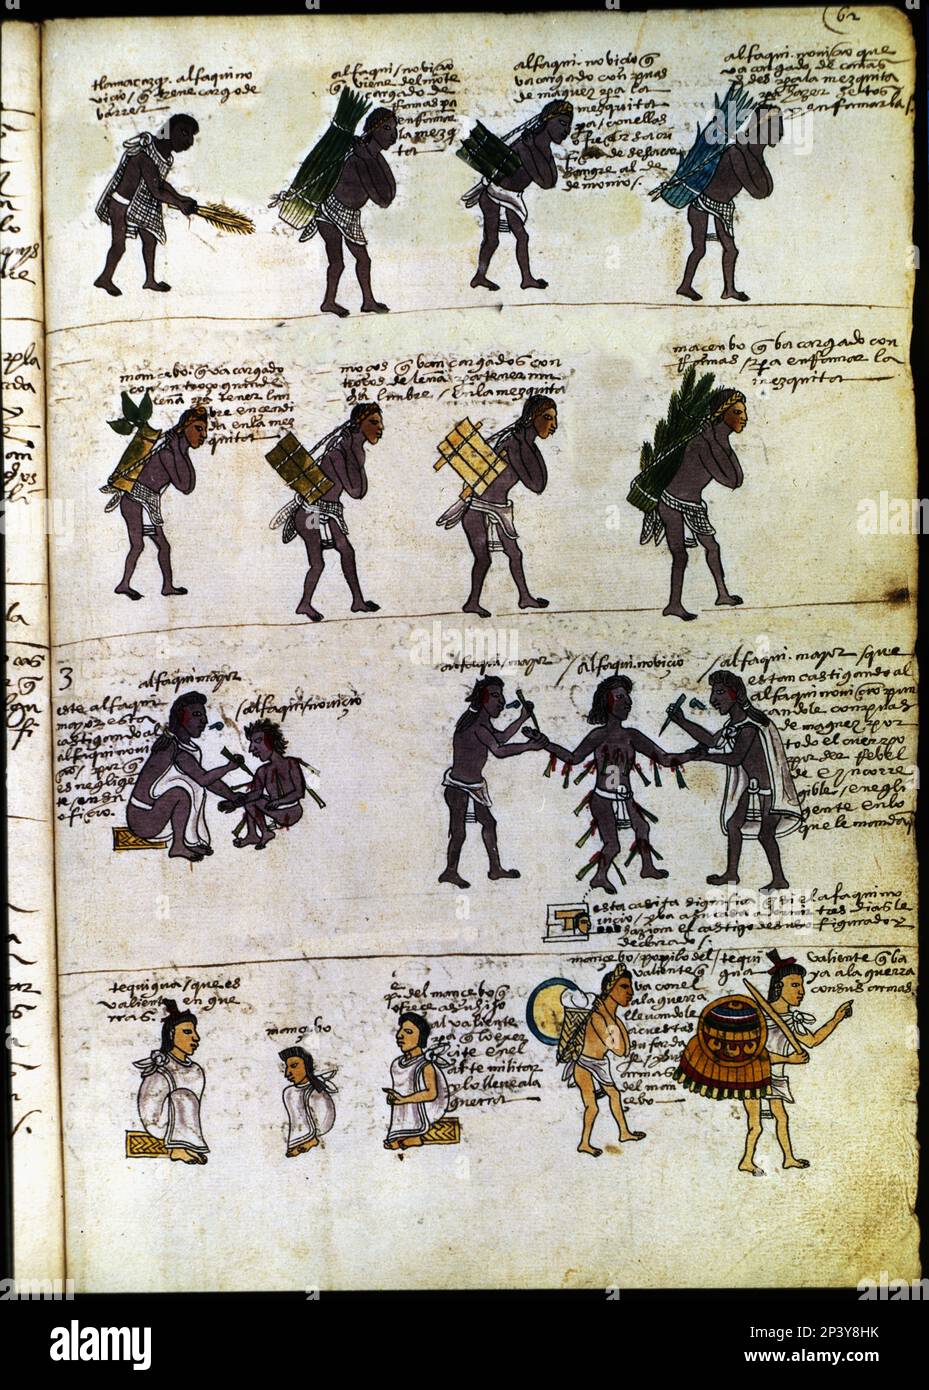 Codex Mendoza (1535 - 1550), hieroglyph representing the educational methods of the Aztecs: (L1,2)) tasks for religious education, (L3) punishments and (L4) military practice. Stock Photo